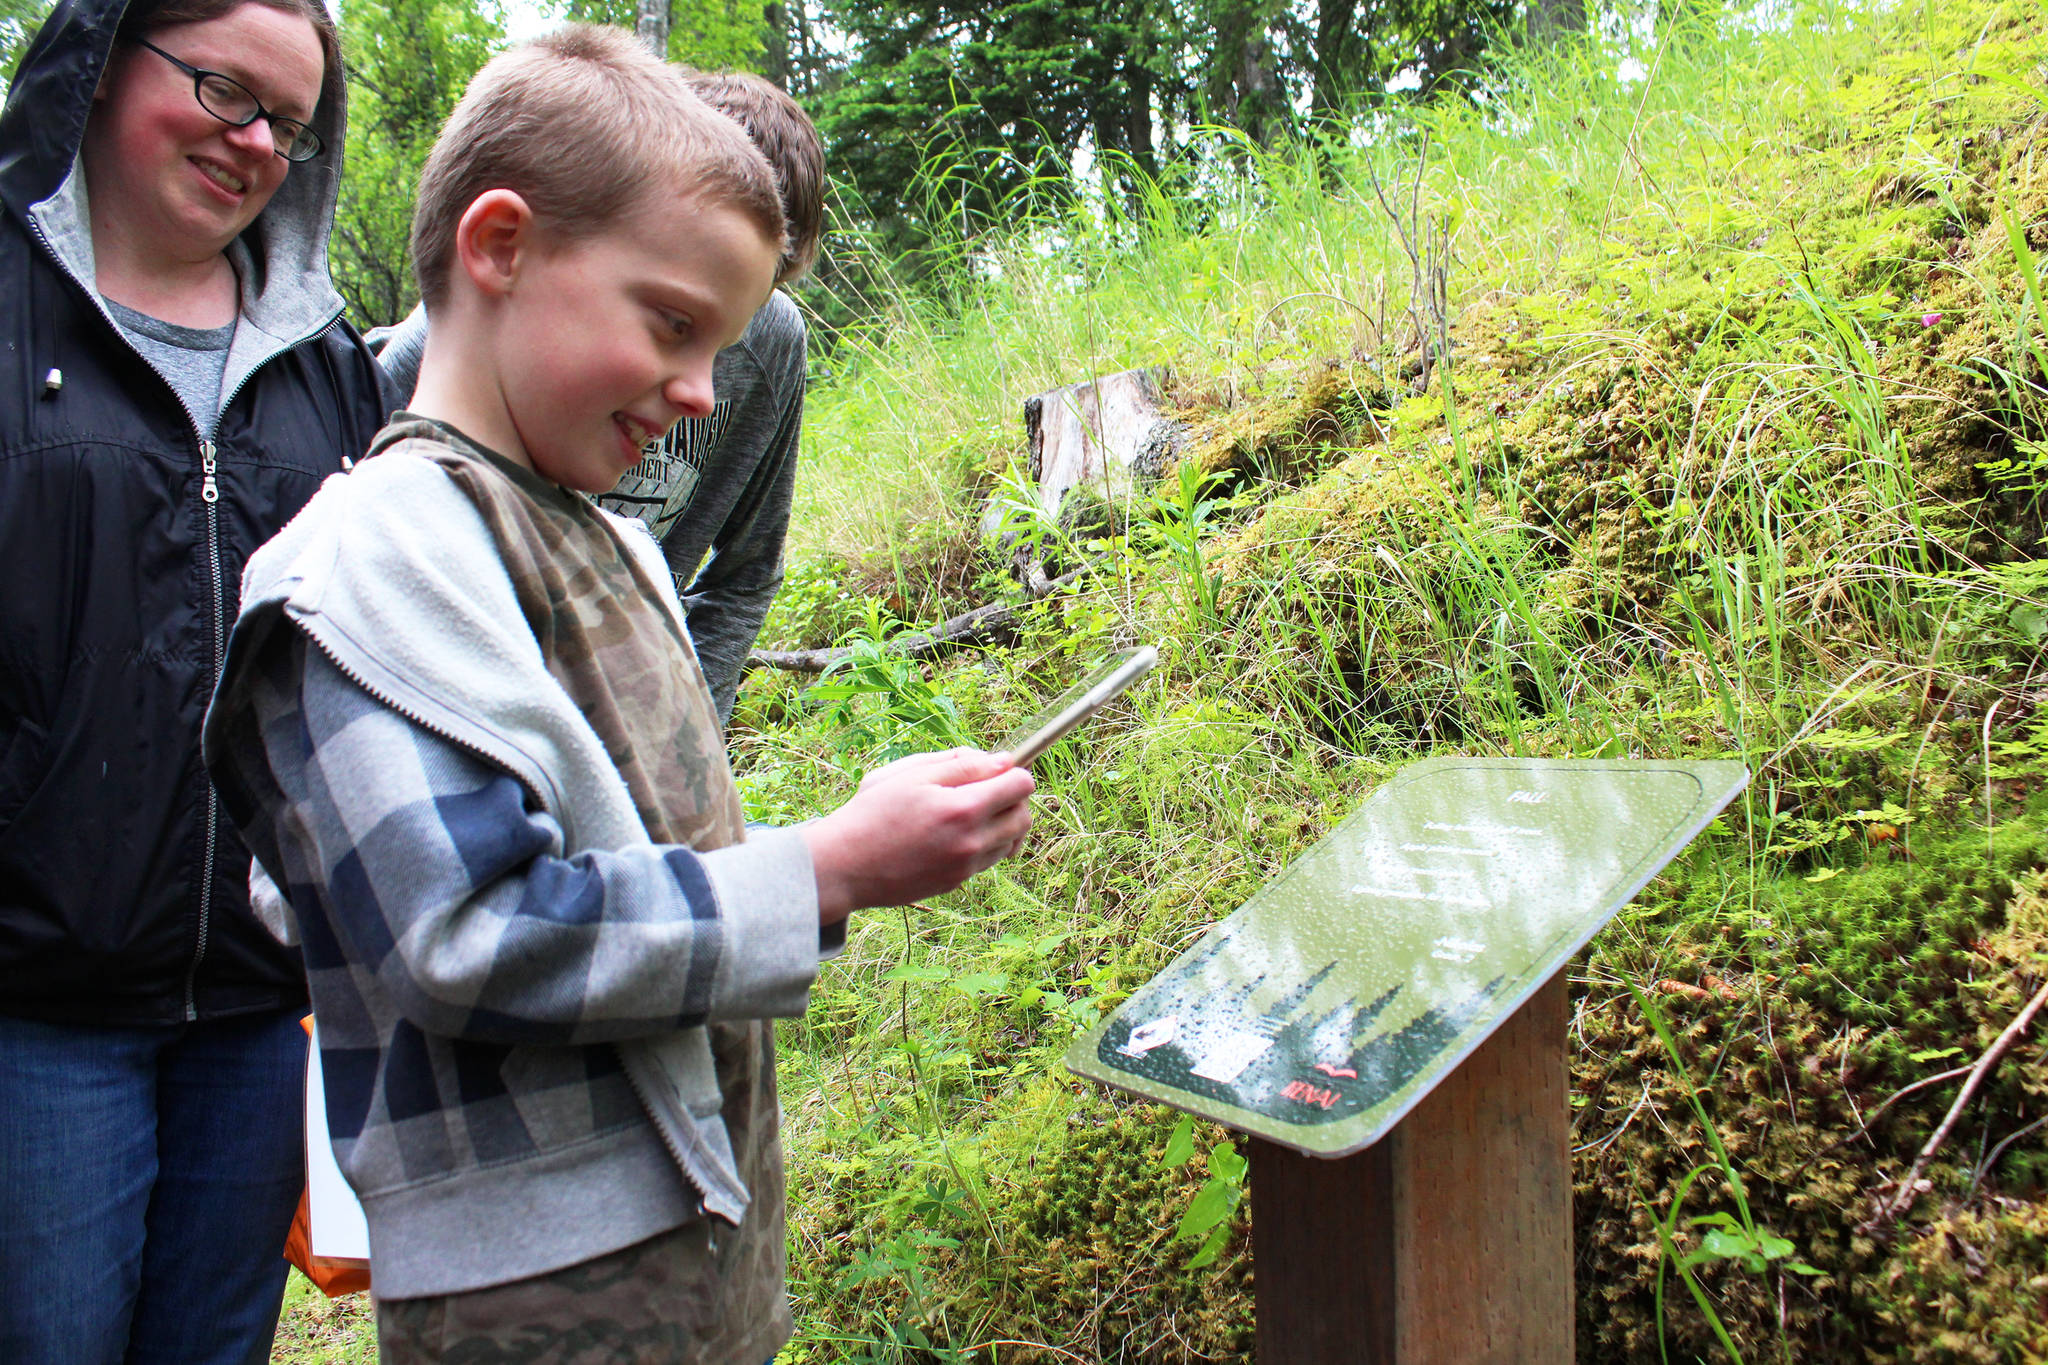 Nikolas Bezdecny scans a code on a sign displaying the poem he wrote for Pathways of Poetry on Saturday, July 1, 2017 on the trail at Kenai Municipal Park in Kenai, Alaska. Bezdecny is one of 12 students chosen as winners of the contest out of 86 participants who wrote poems about nature from the project. Scanning the code on the signs brings up an audio recording of the authors reading their pieces. (Photo by Megan Pacer/Peninsula Clarion)